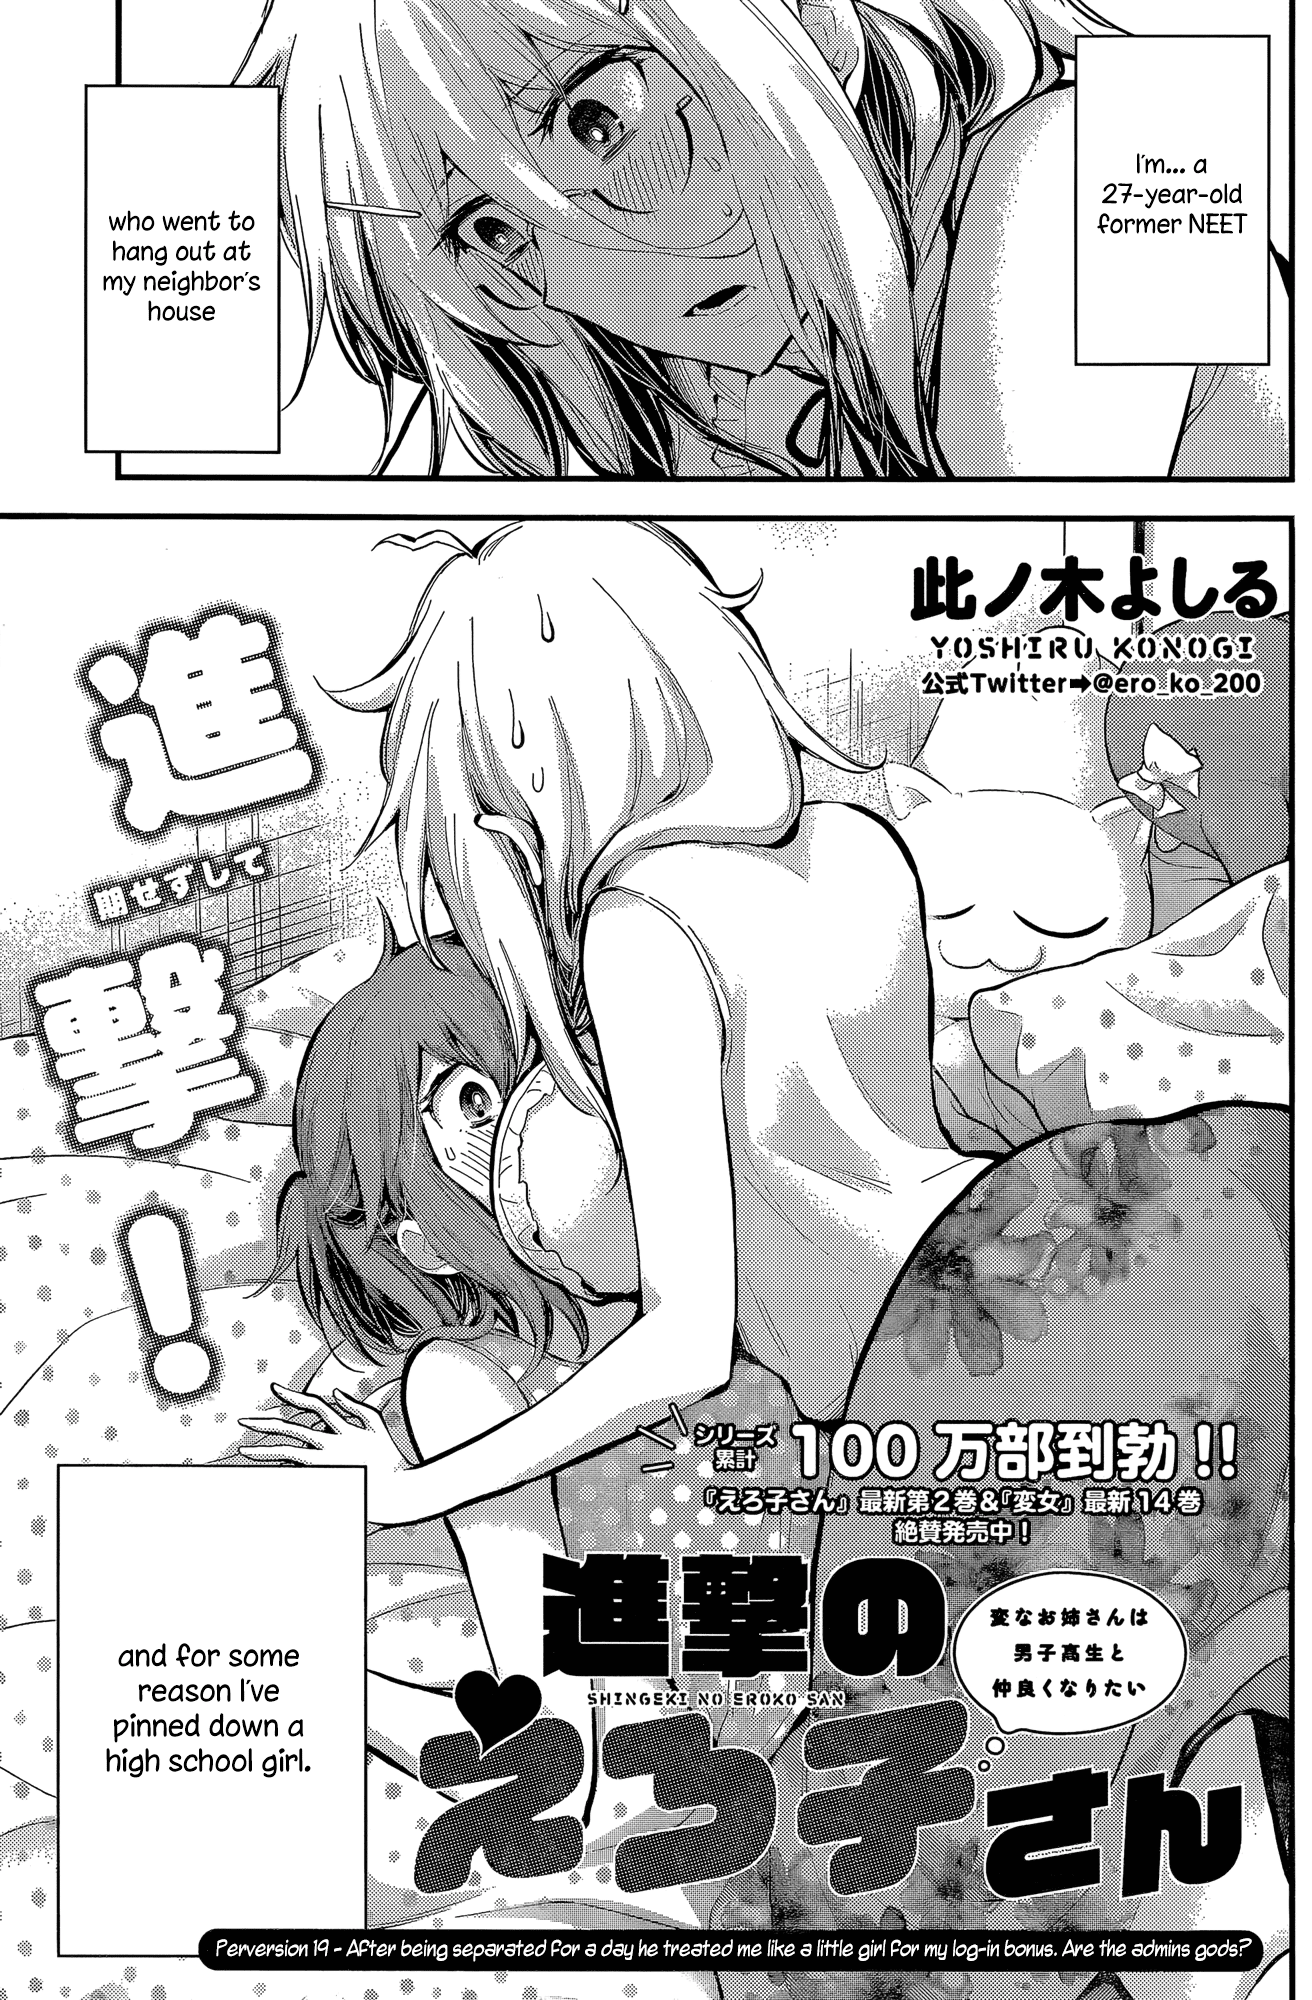 Shingeki No Eroko-San Chapter 19: Perversion 19: After Being Separated For A Day He Treated Me Like A Little Girl For My Log-In Bonus. Are The Admins Gods? - Picture 1